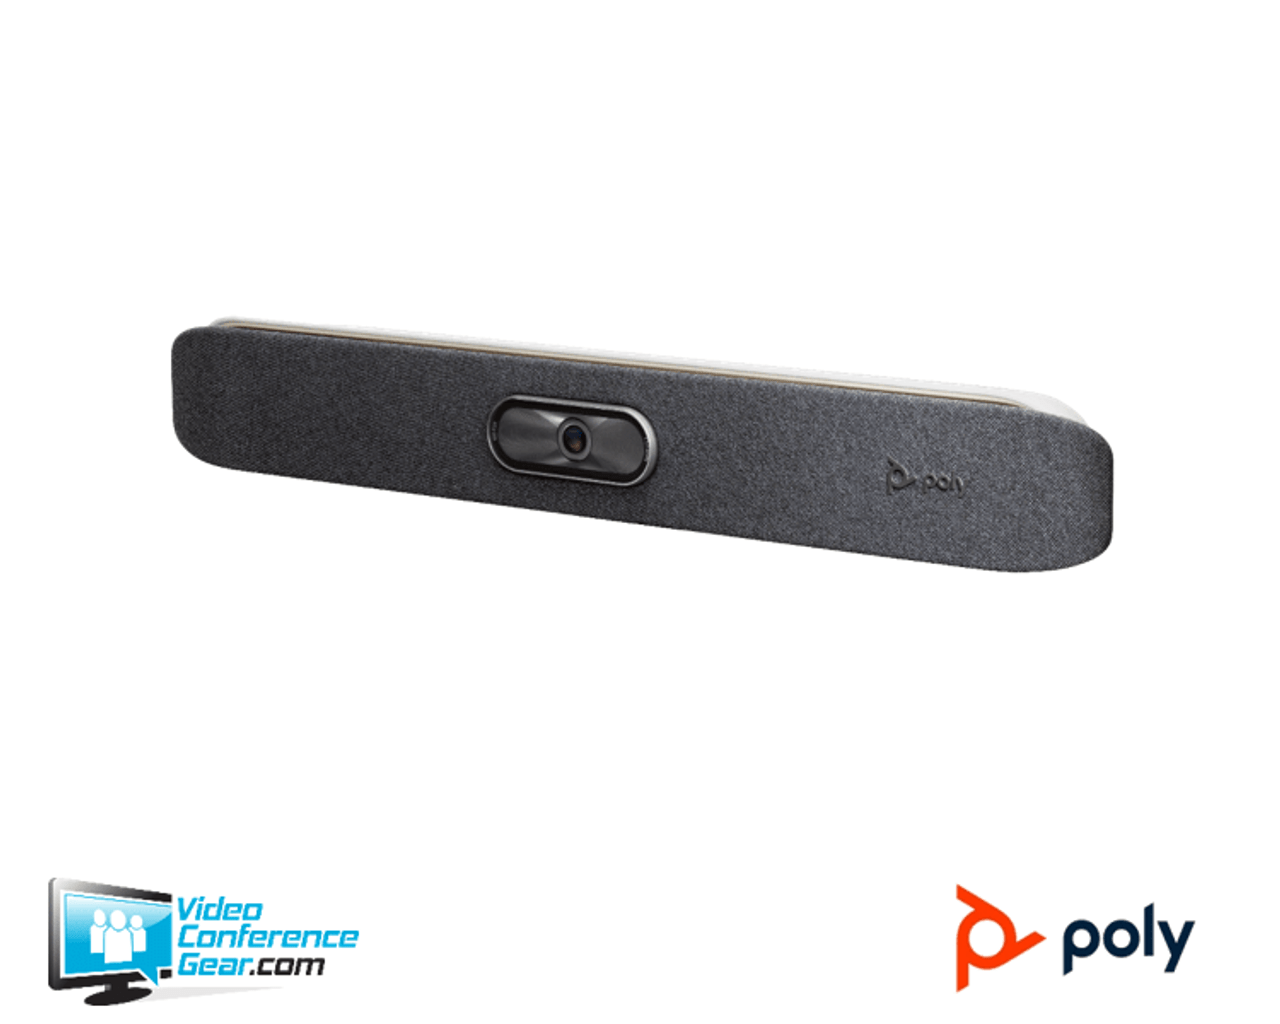 Poly Studio X30 Video Soundbar Bundled with the Poly TC8 Ready to Use with Zoom Rooms, Microsoft Teams and Other Leading Video Conferencing Platforms